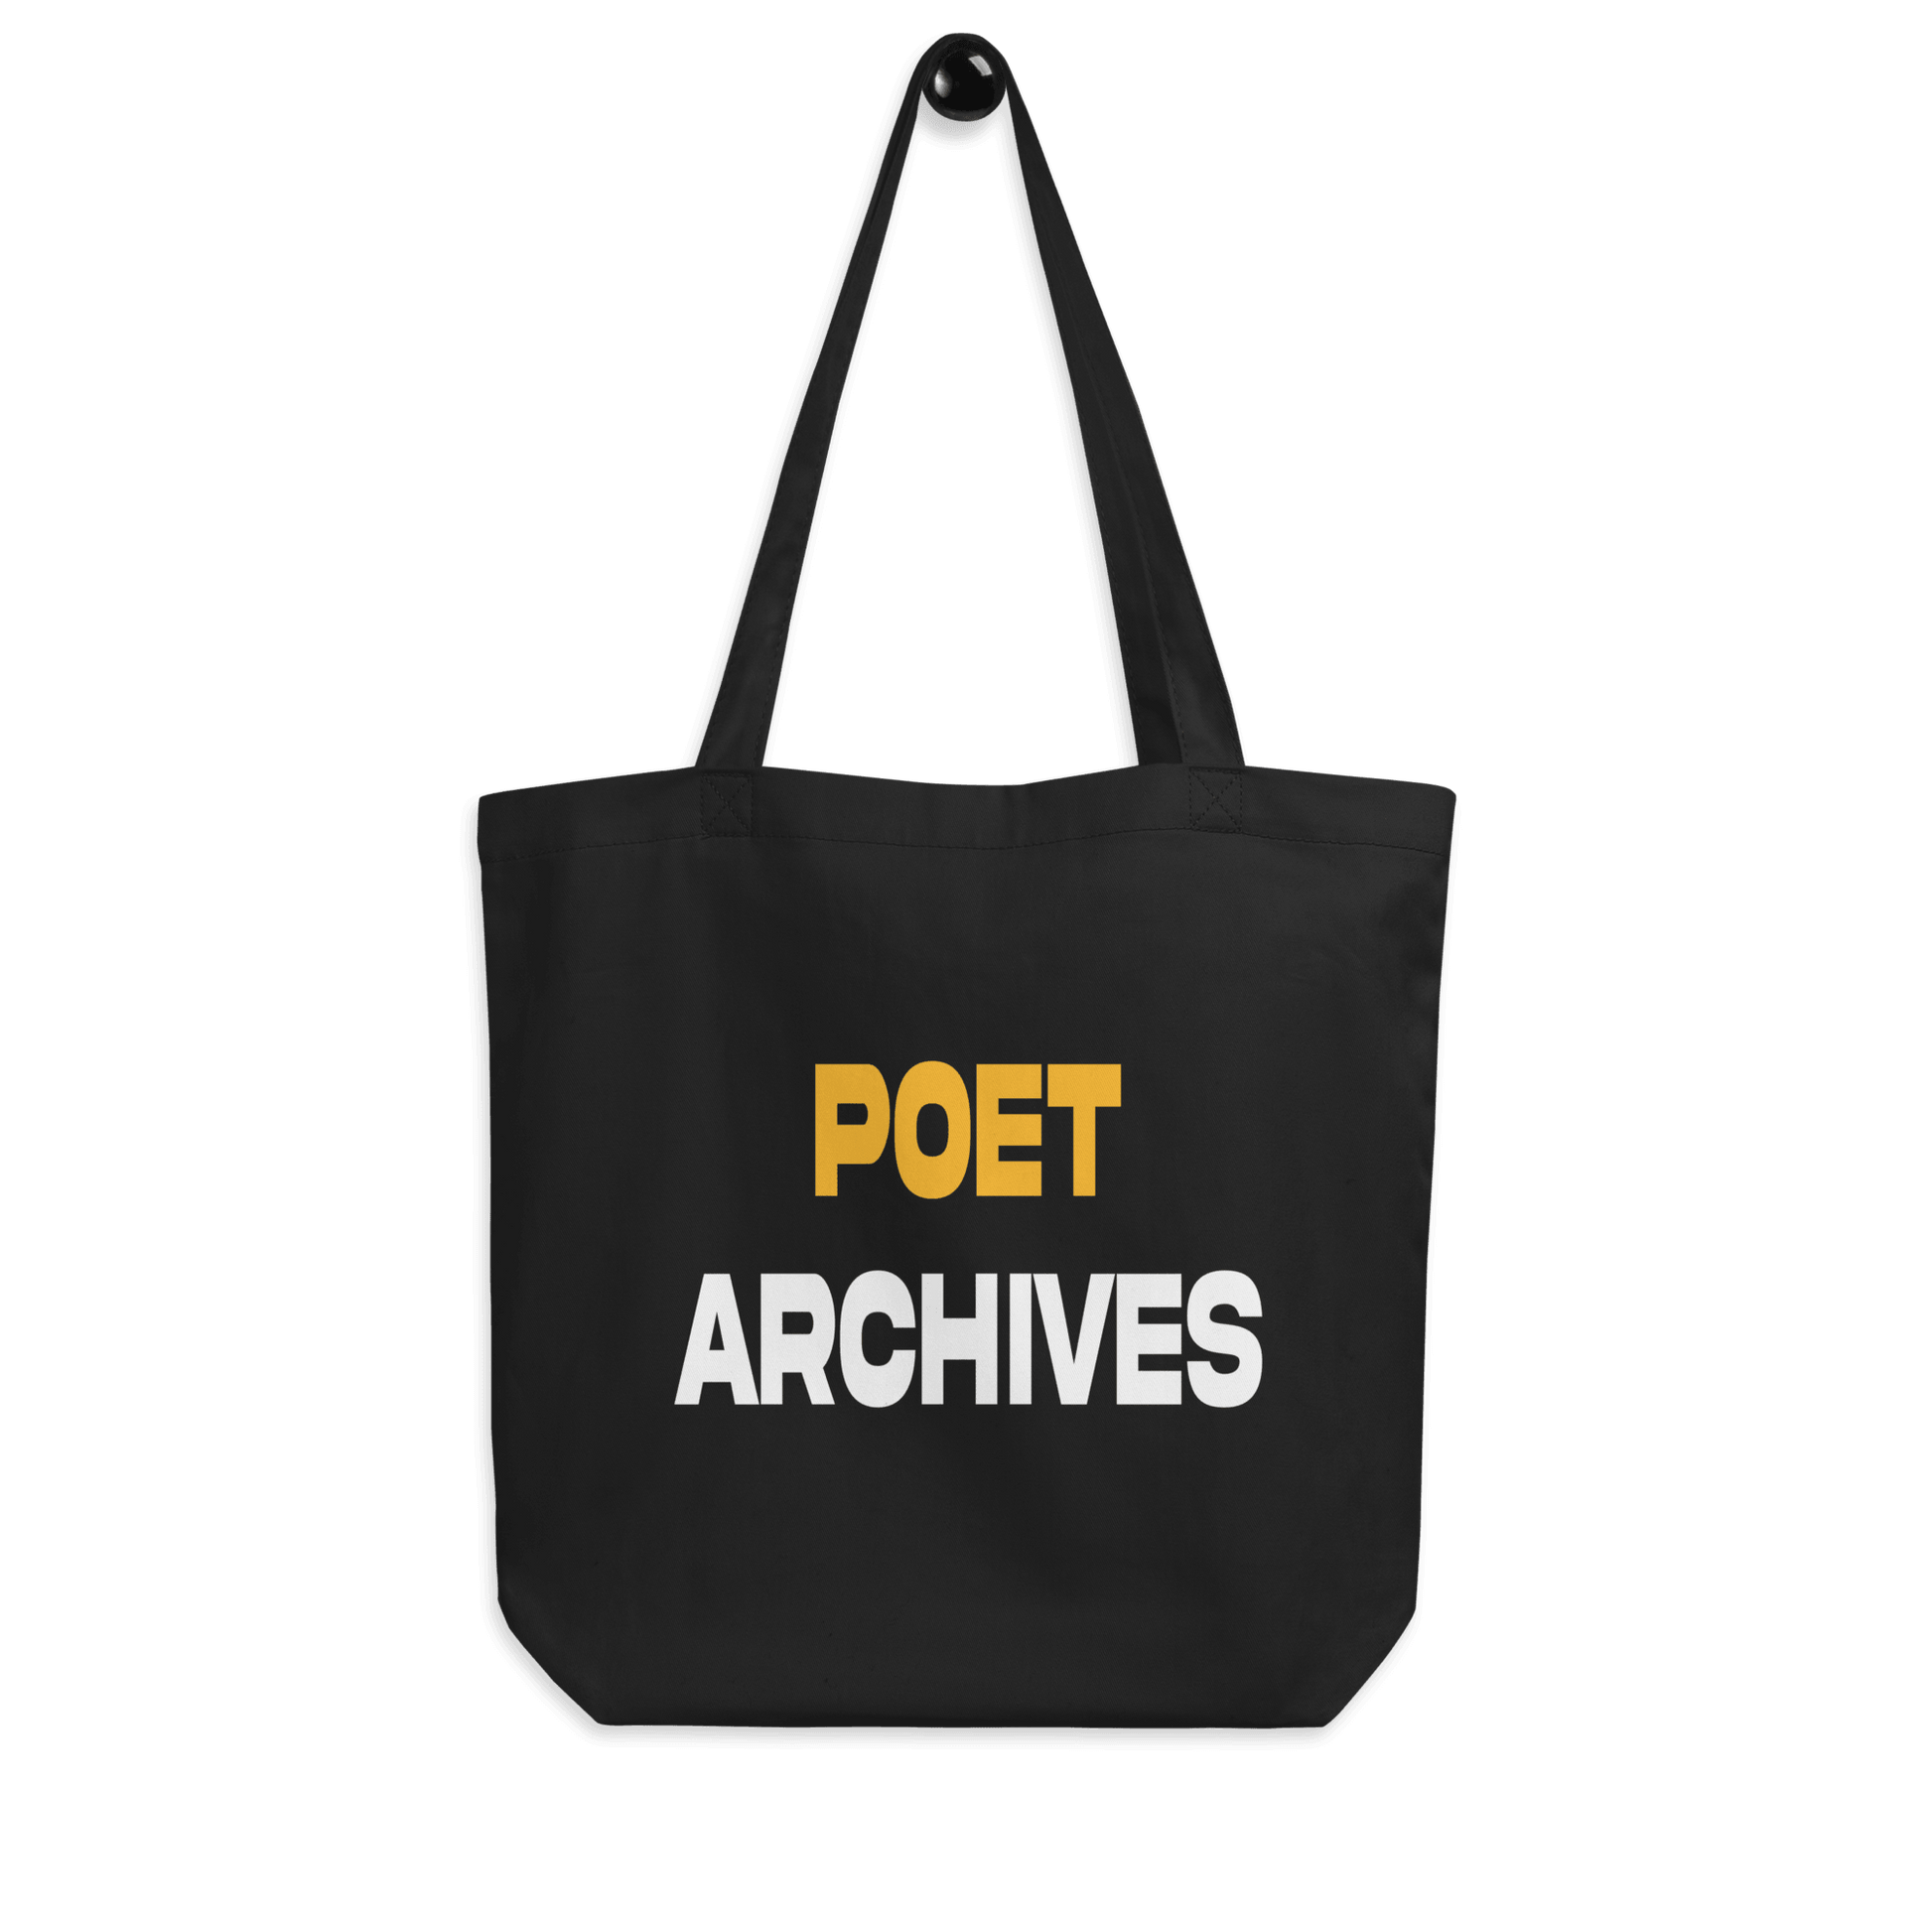 Find Your Meaning double sided tote bag - Poet Archives